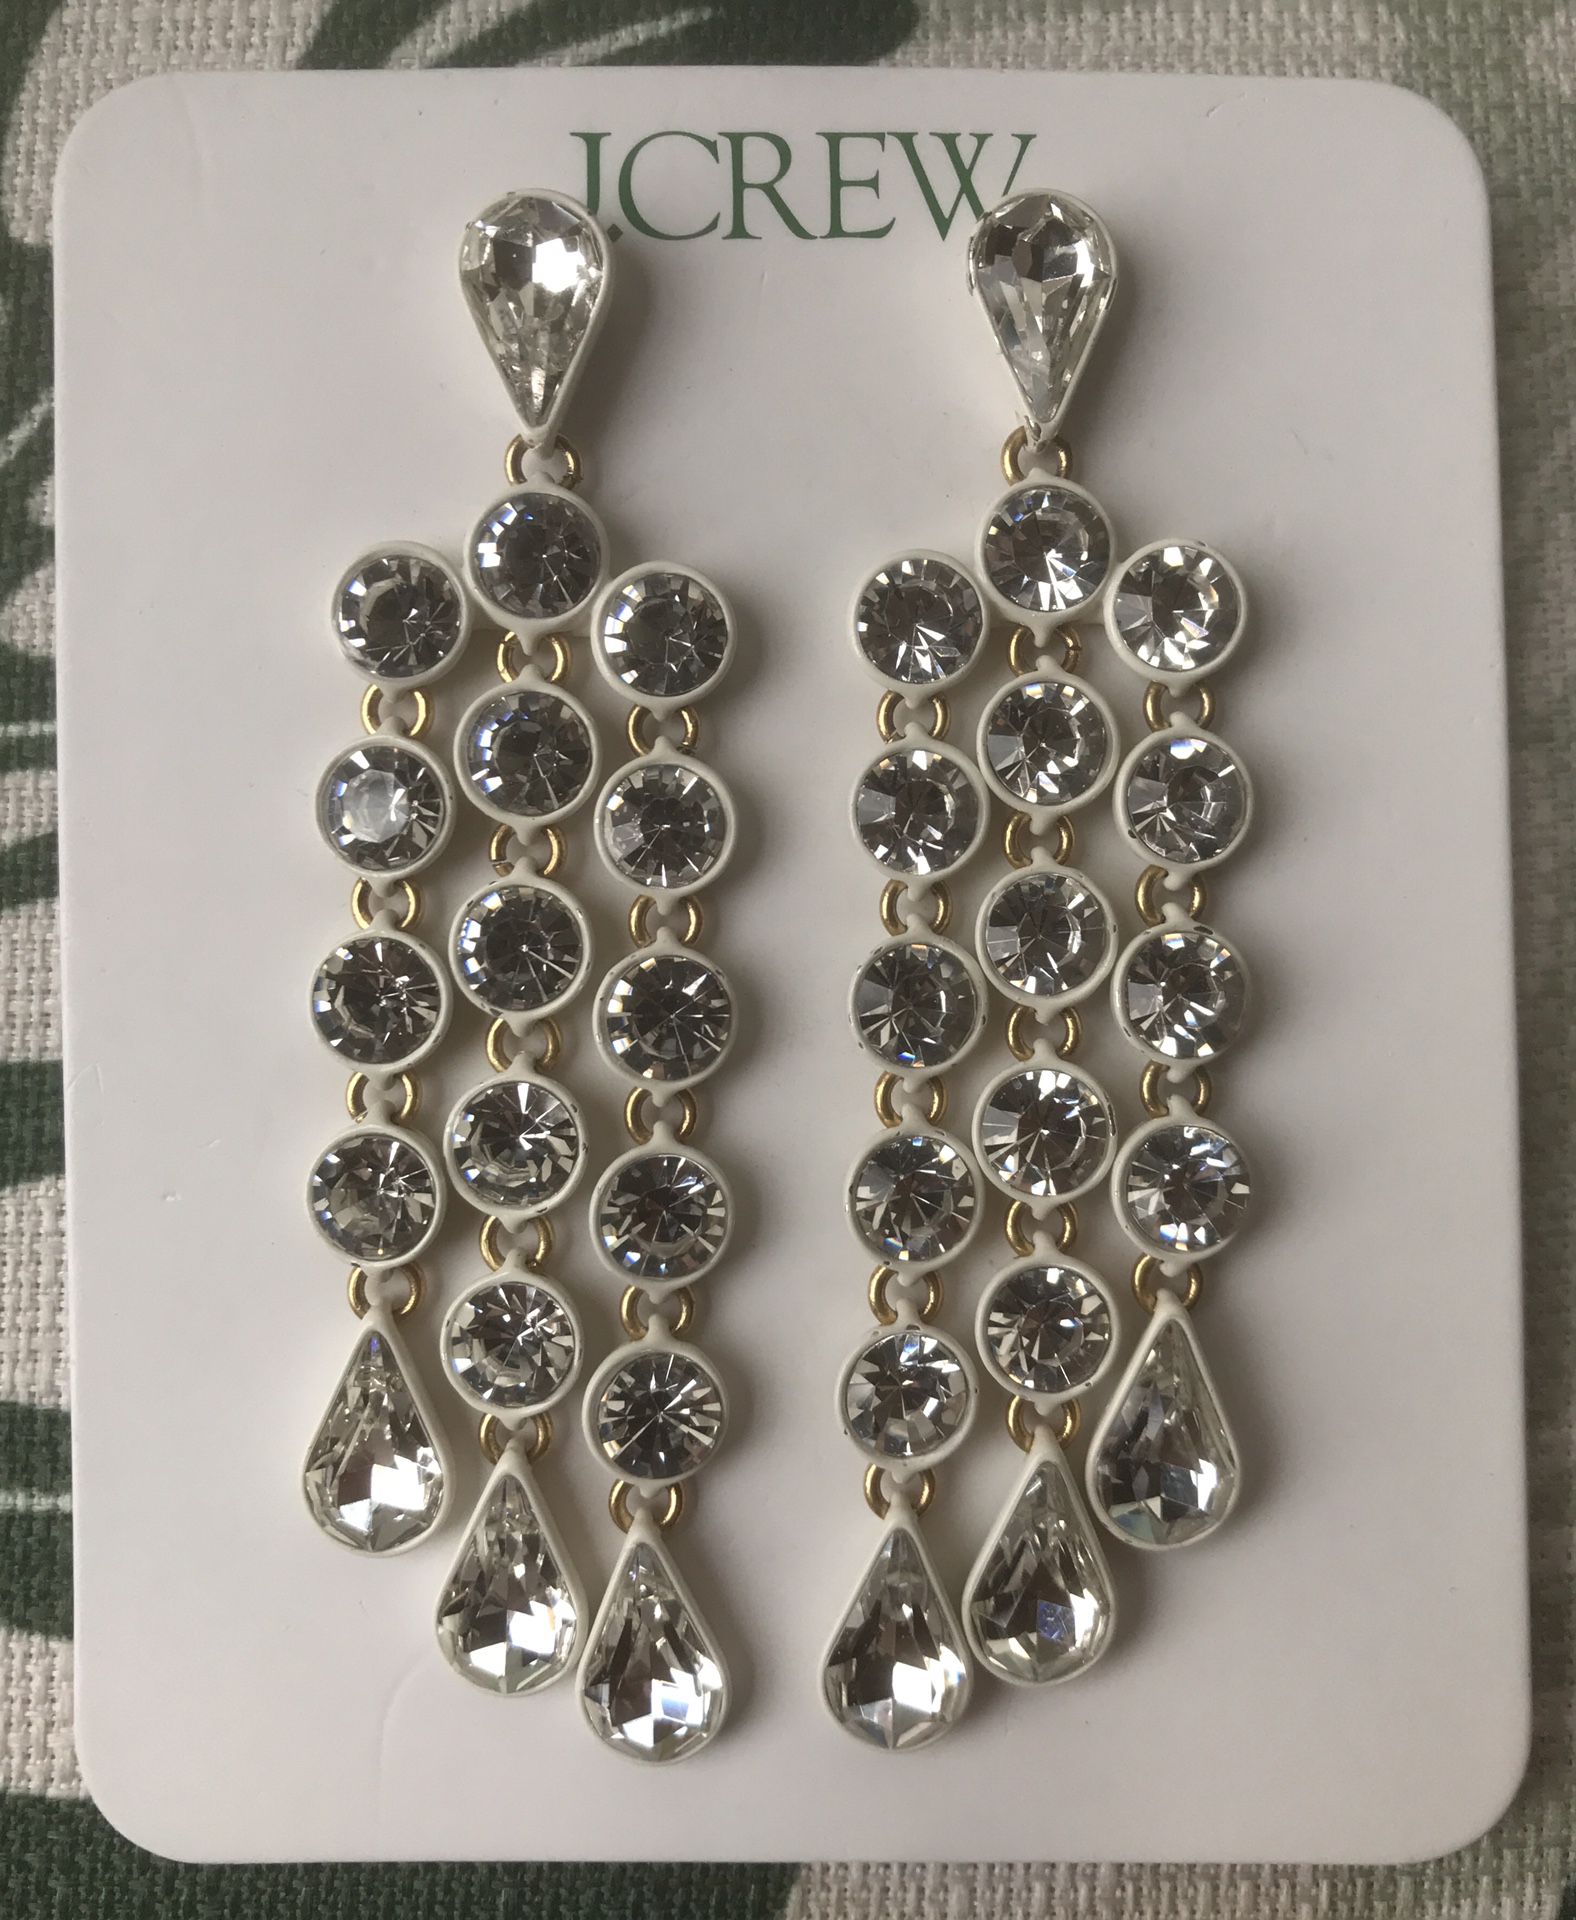 (NEW) (1 AVAILABLE) WOMEN’S J.CREW SPARKLY WATERFALL EARRINGS - SIZE: 4” (MSRP: $69.50)